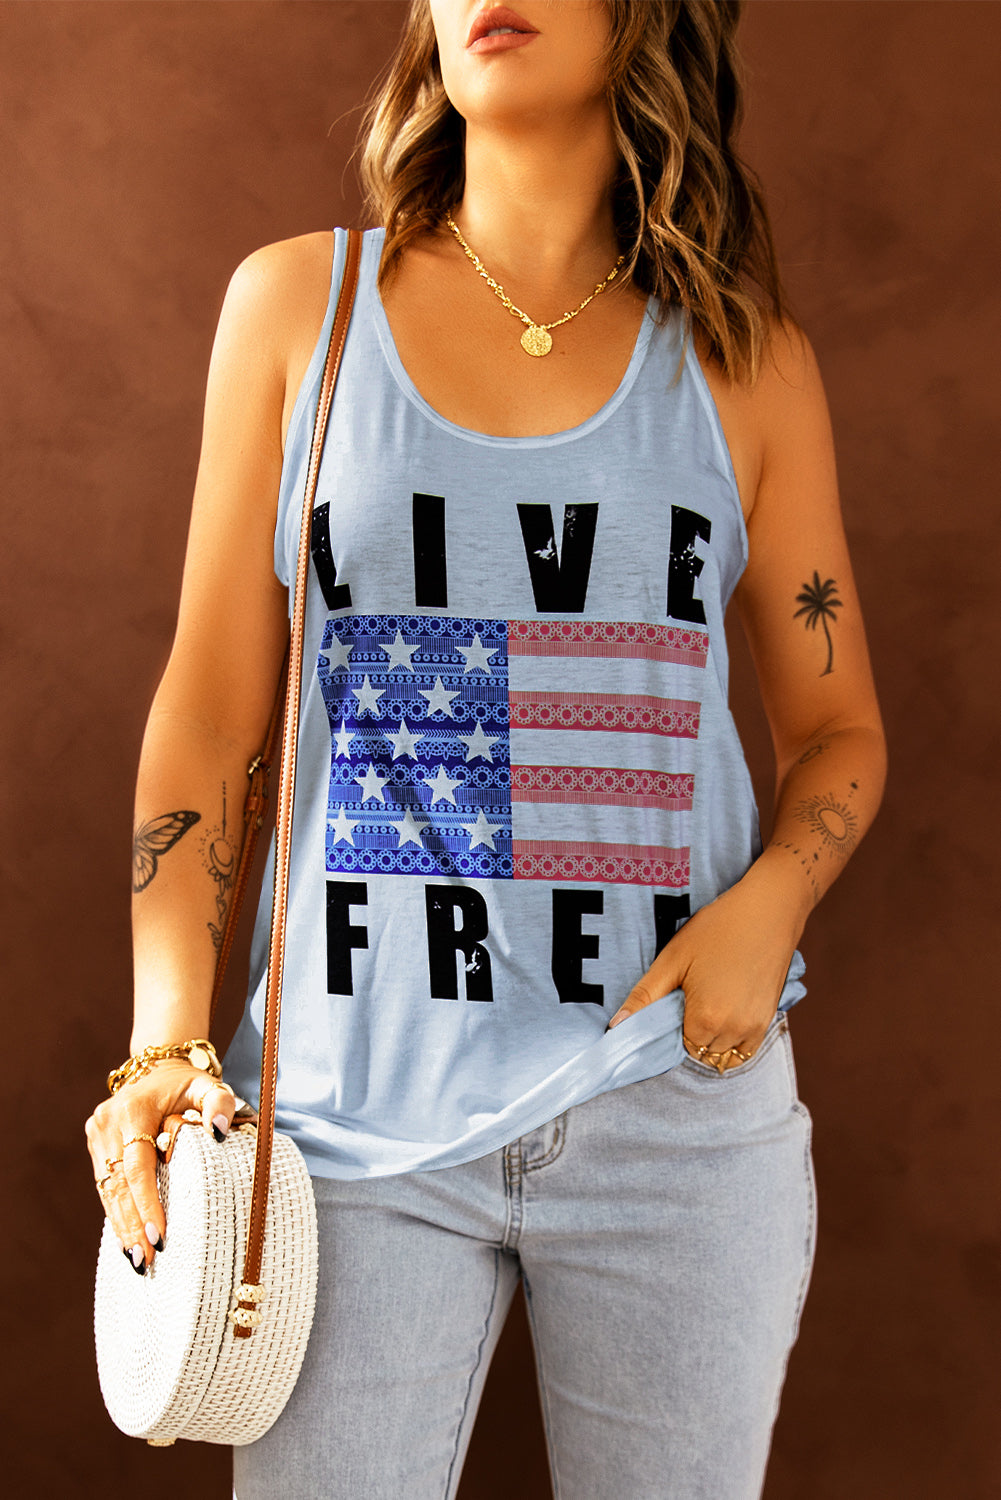 LIVE FREE Graphic Workout Tank Tops Womens